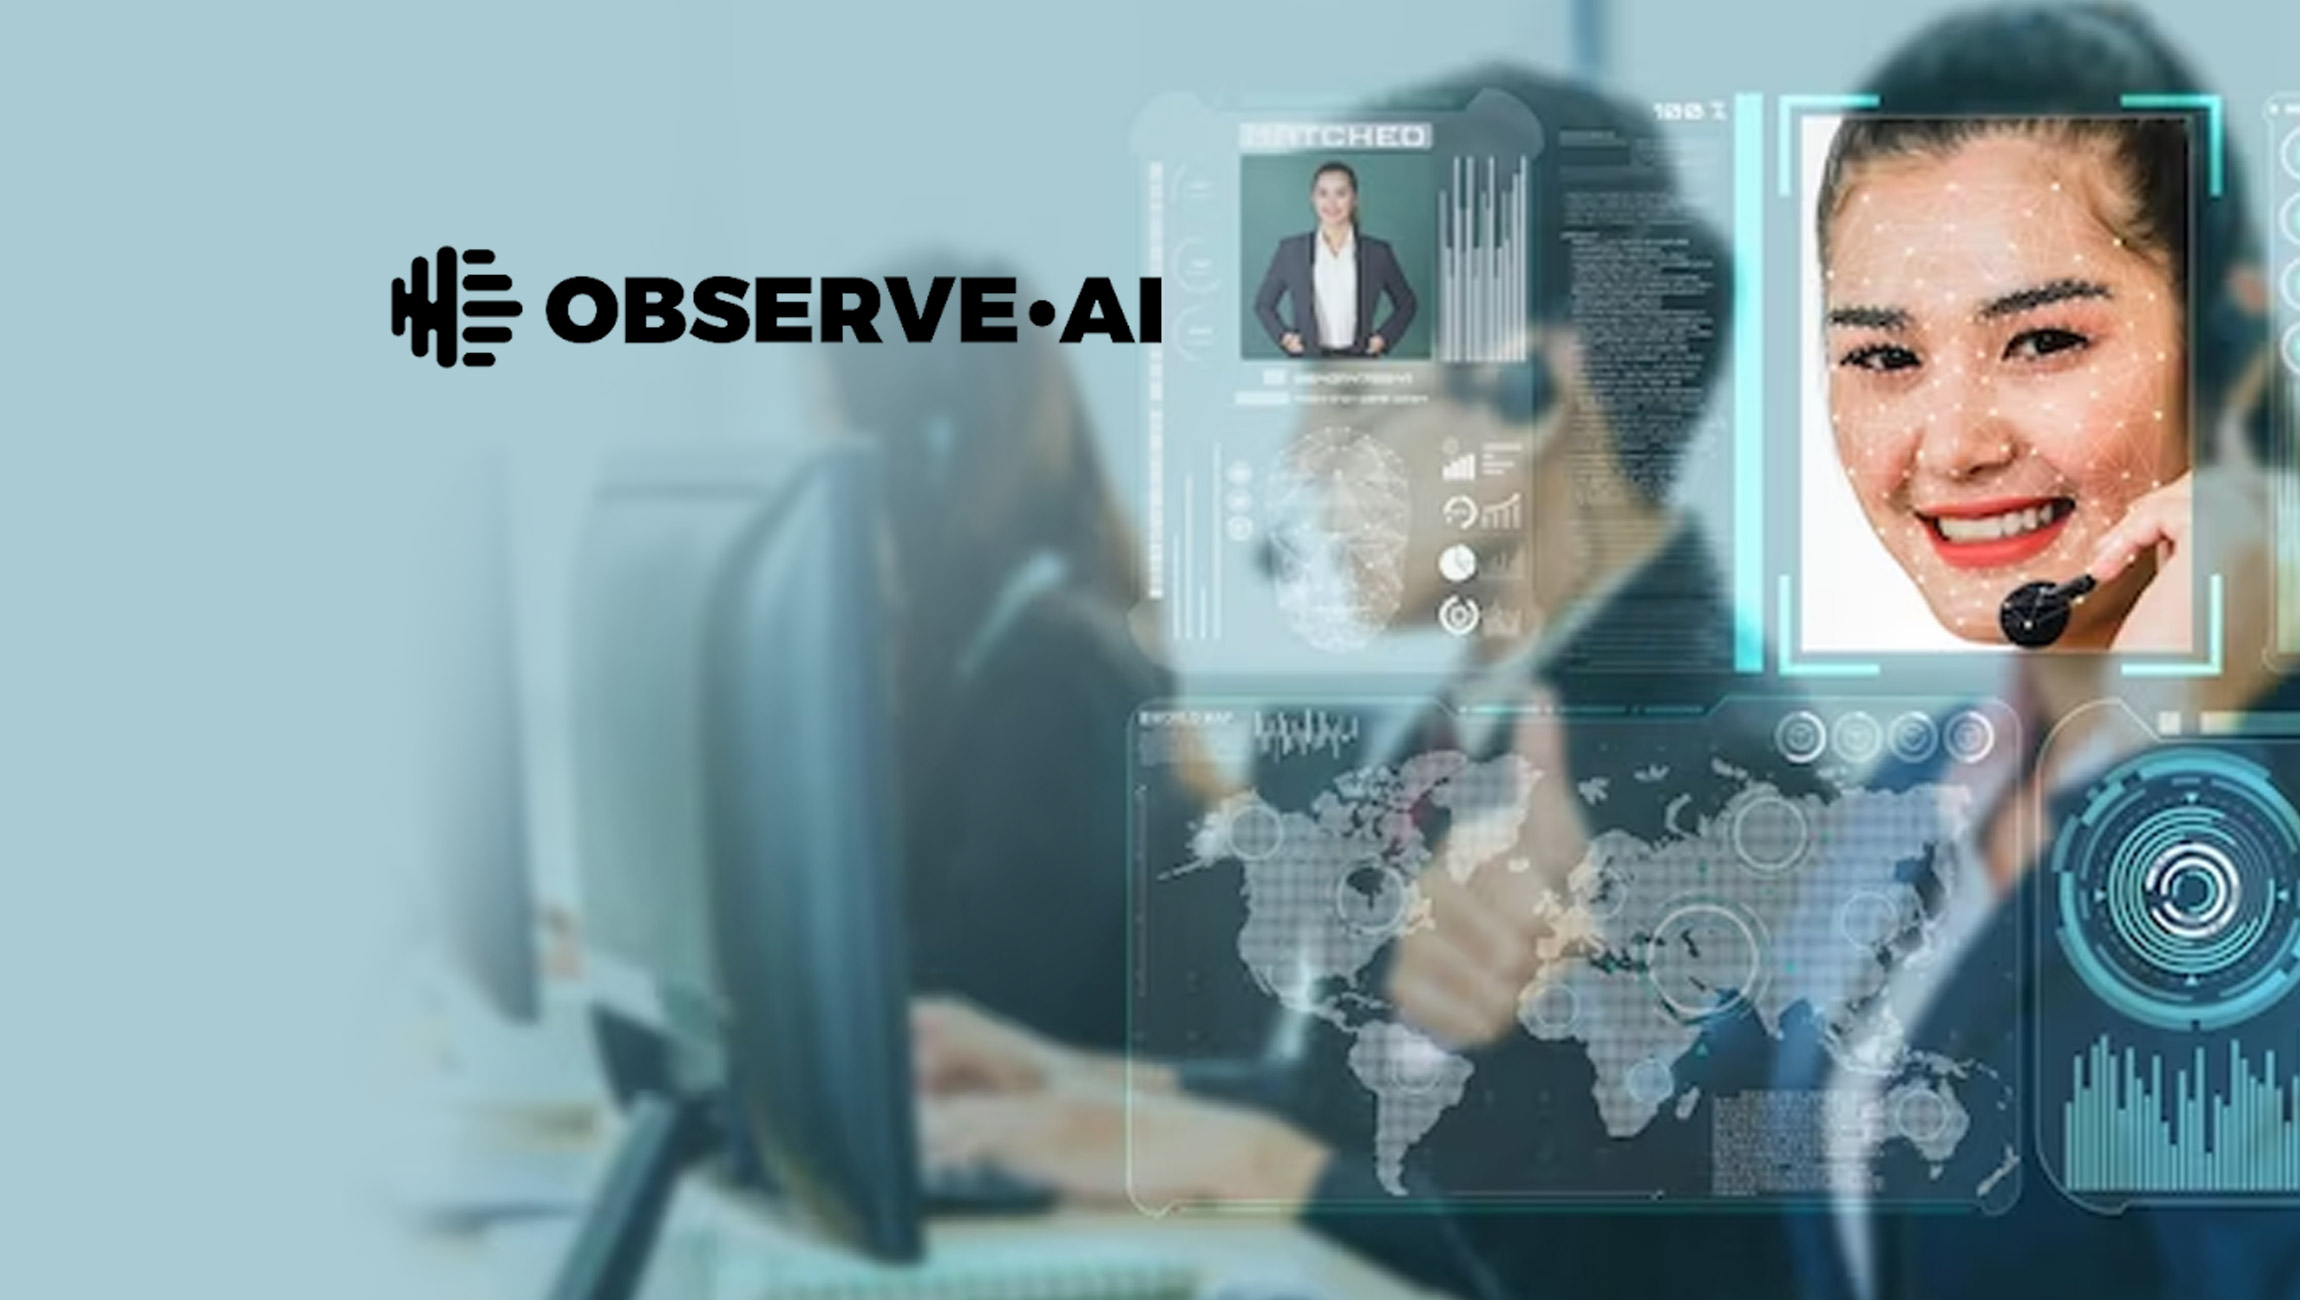 Observe.AI Launches Real-Time AI to Help Contact Centers Drive Sales and Retain Customers With End-to-End Conversation Intelligence